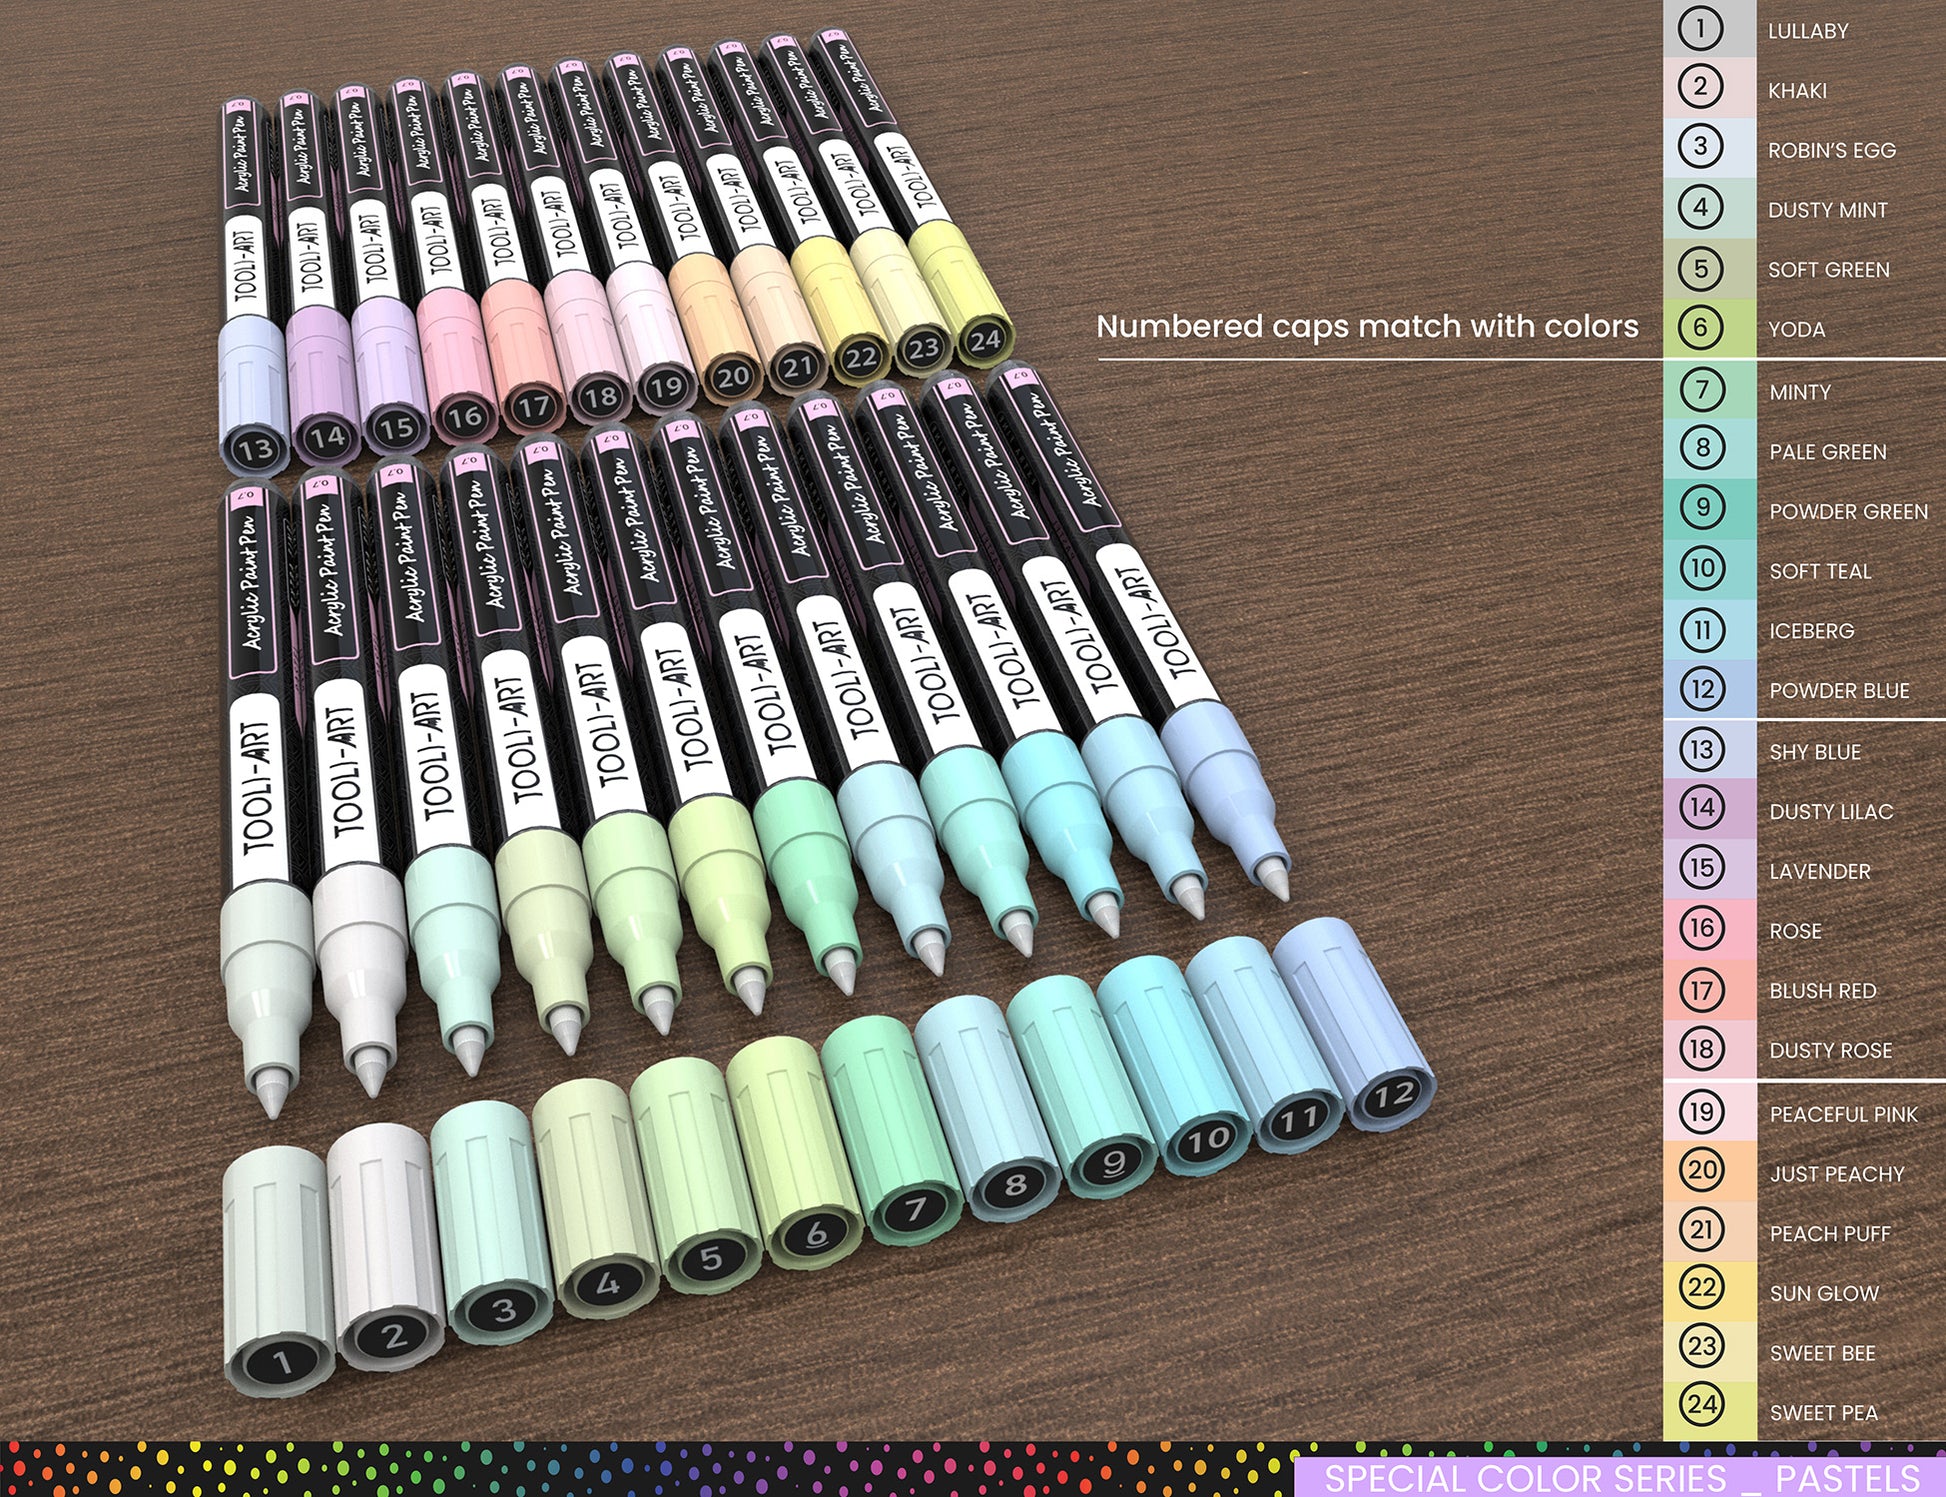 Schneider Paint-It 320 Acrylic Markers, 4 mm Bullet Tip, Wallet, 6 Assorted Pastel Ink Colors